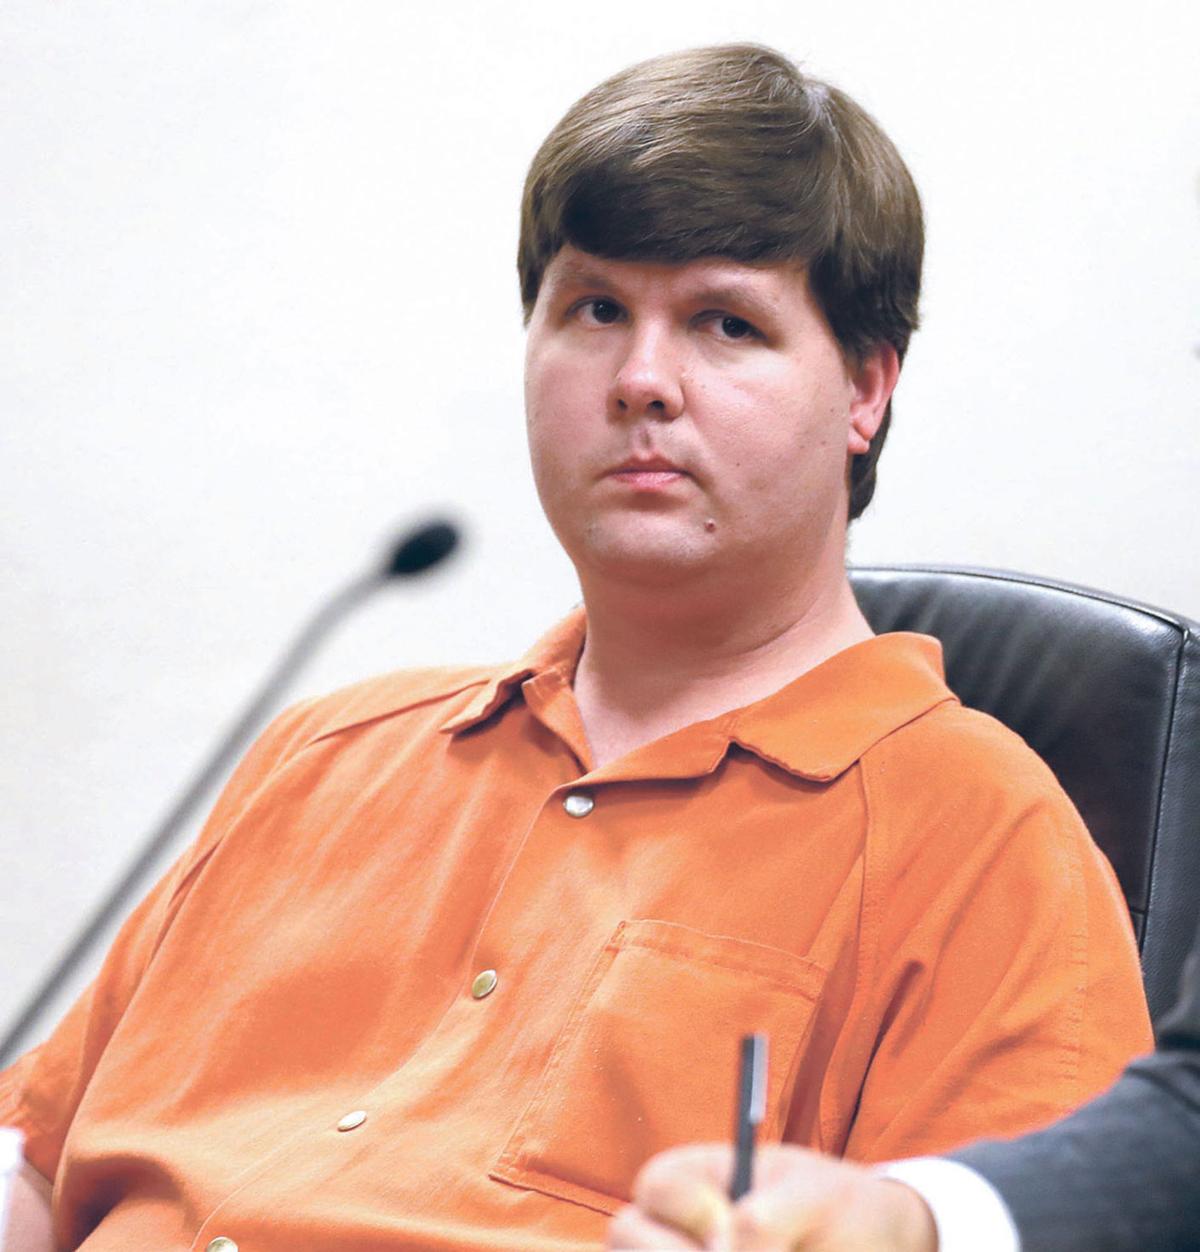 Dad Accused of Intentionally Leaving His Son In Hot Car To Die, Trial To Start In Sept.  5700531970ee4.image